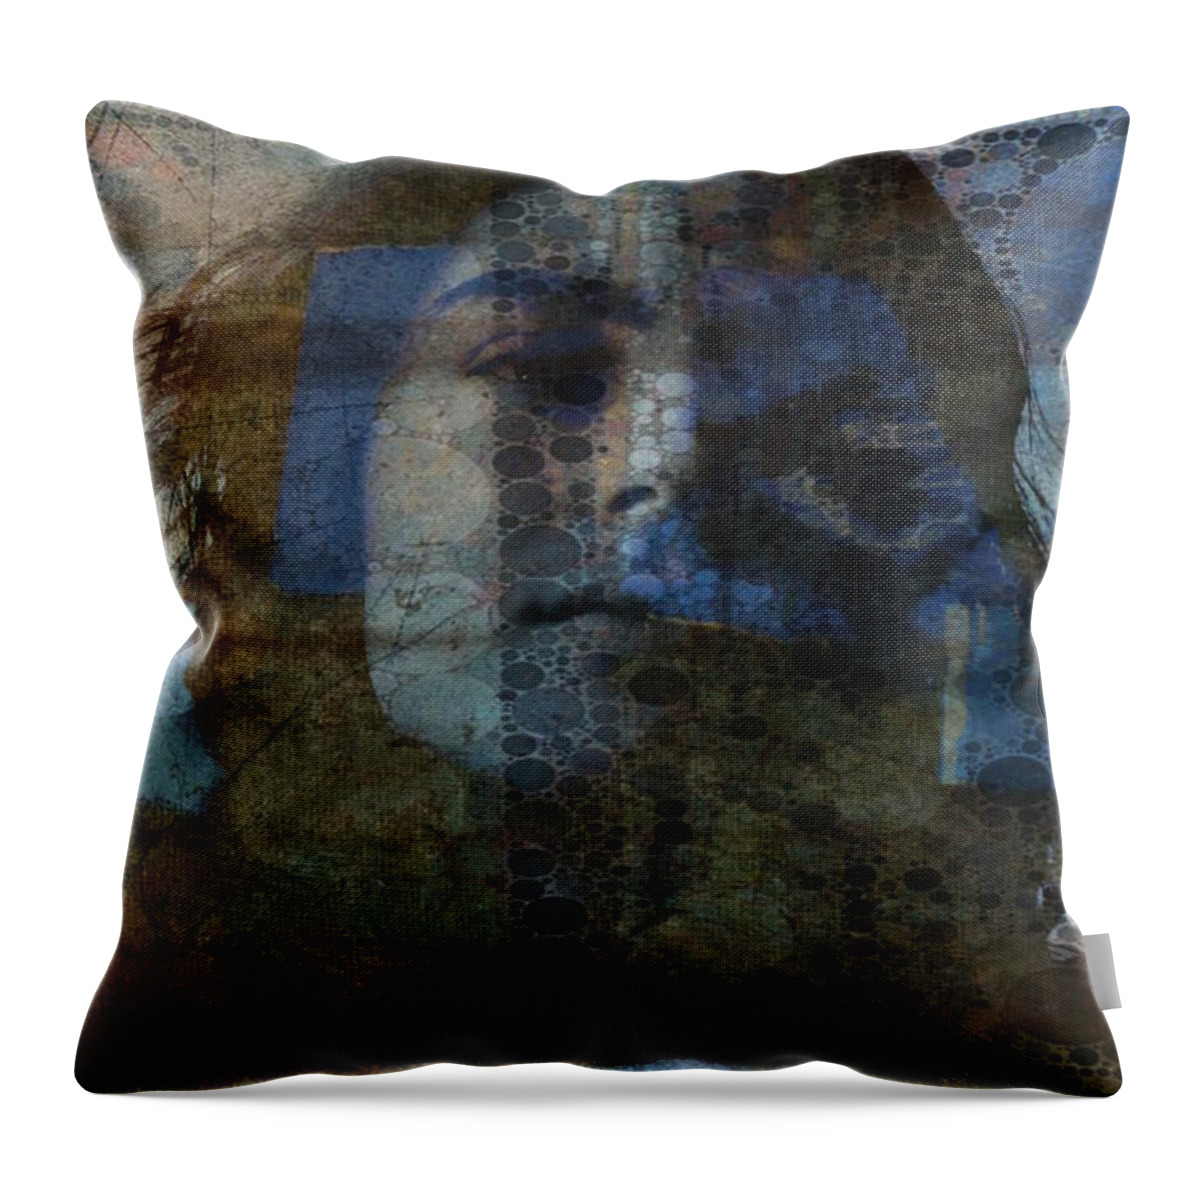 Female Throw Pillow featuring the digital art Retro _ Behind Blue Eyes by Paul Lovering